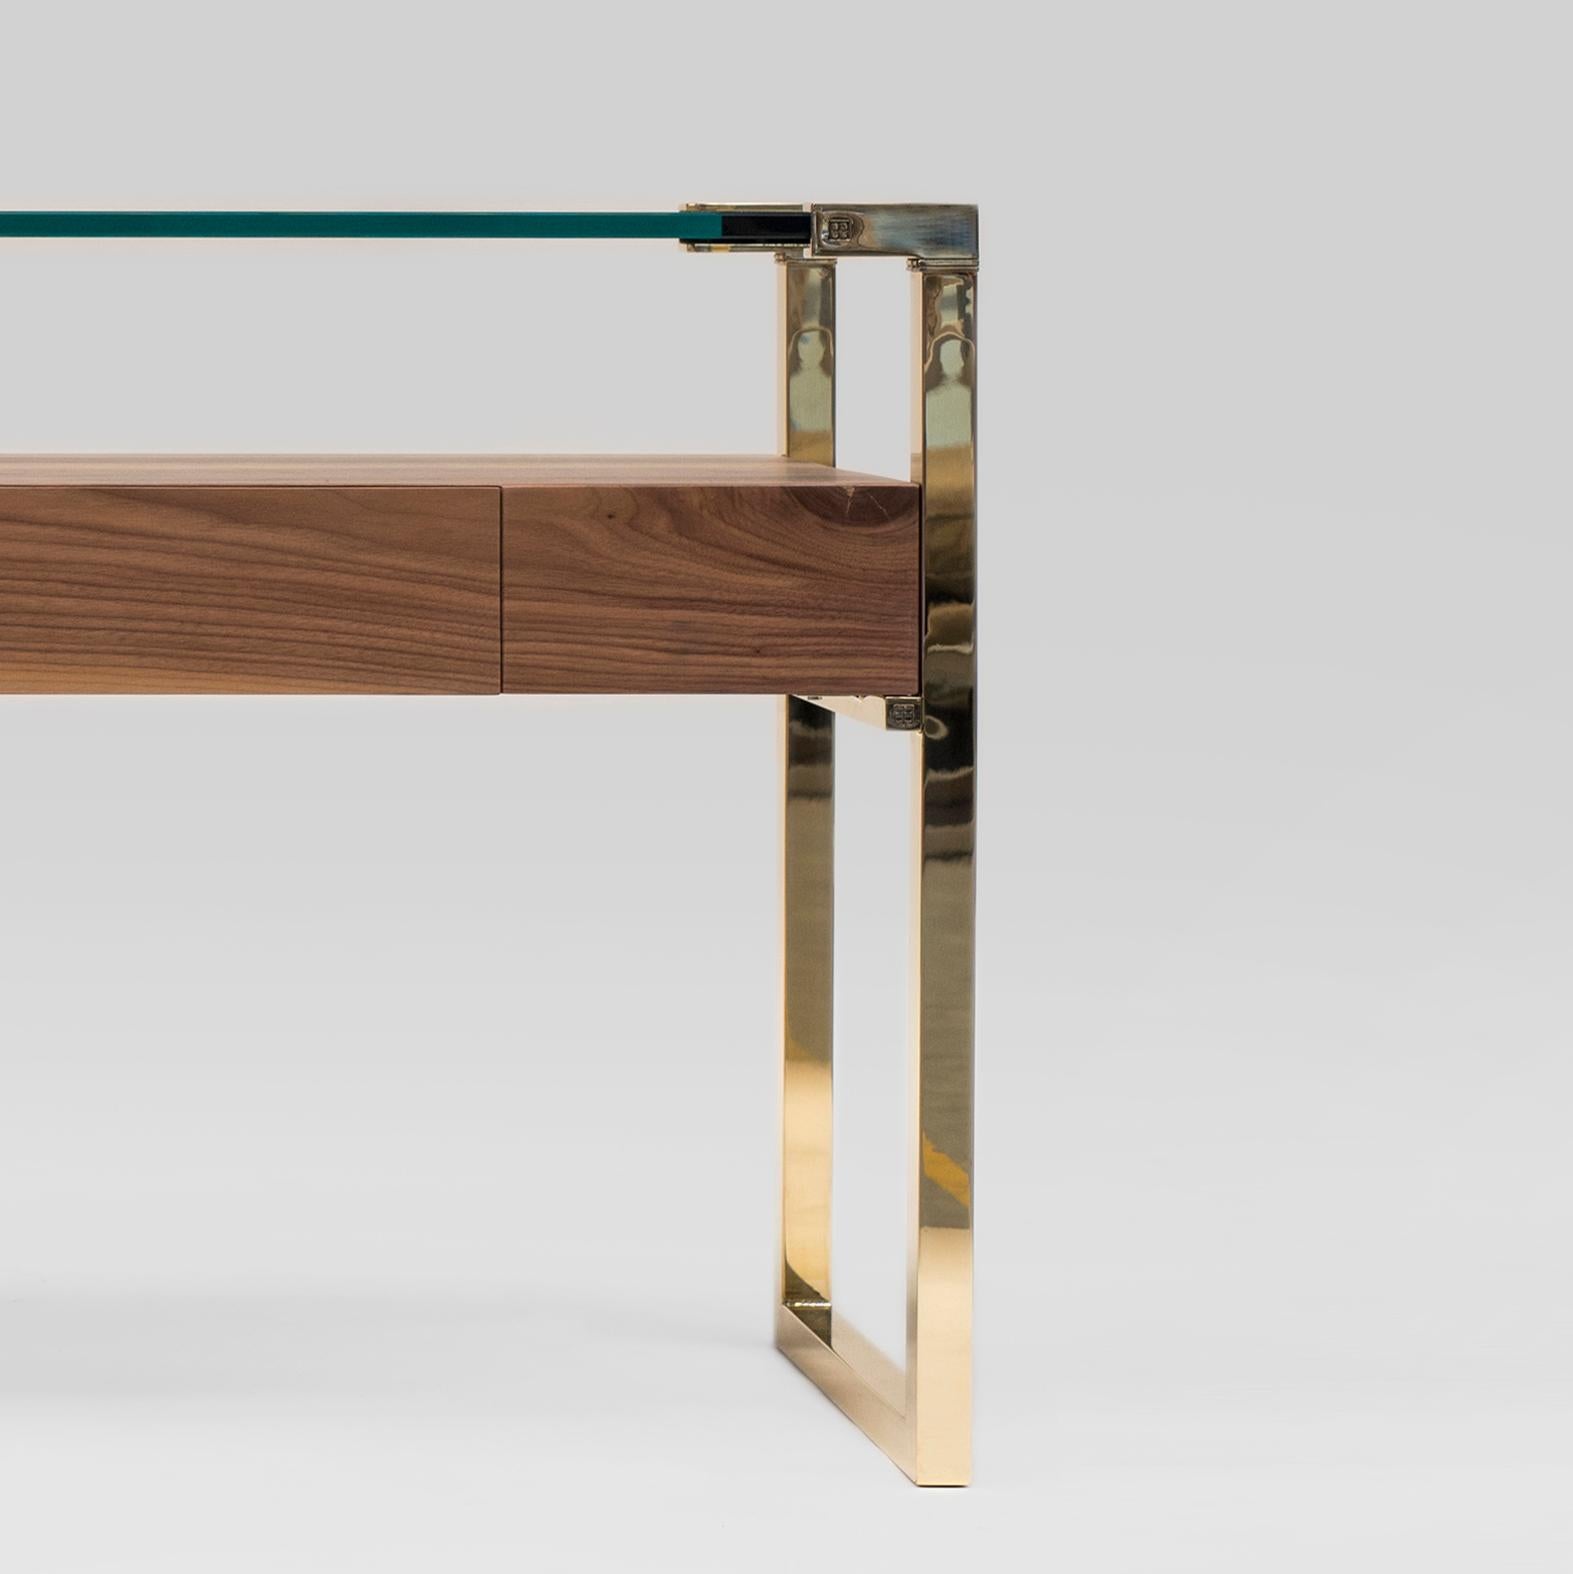 Contemporary console designed by Peter Ghyczy in 2009.
Manufactured by Ghyczy (Netherlands)

The twin frames are constructed of 3 × 3 square tubes and secured to the tabletop by cast metal details. Special feature is a solid wooden drawer. The